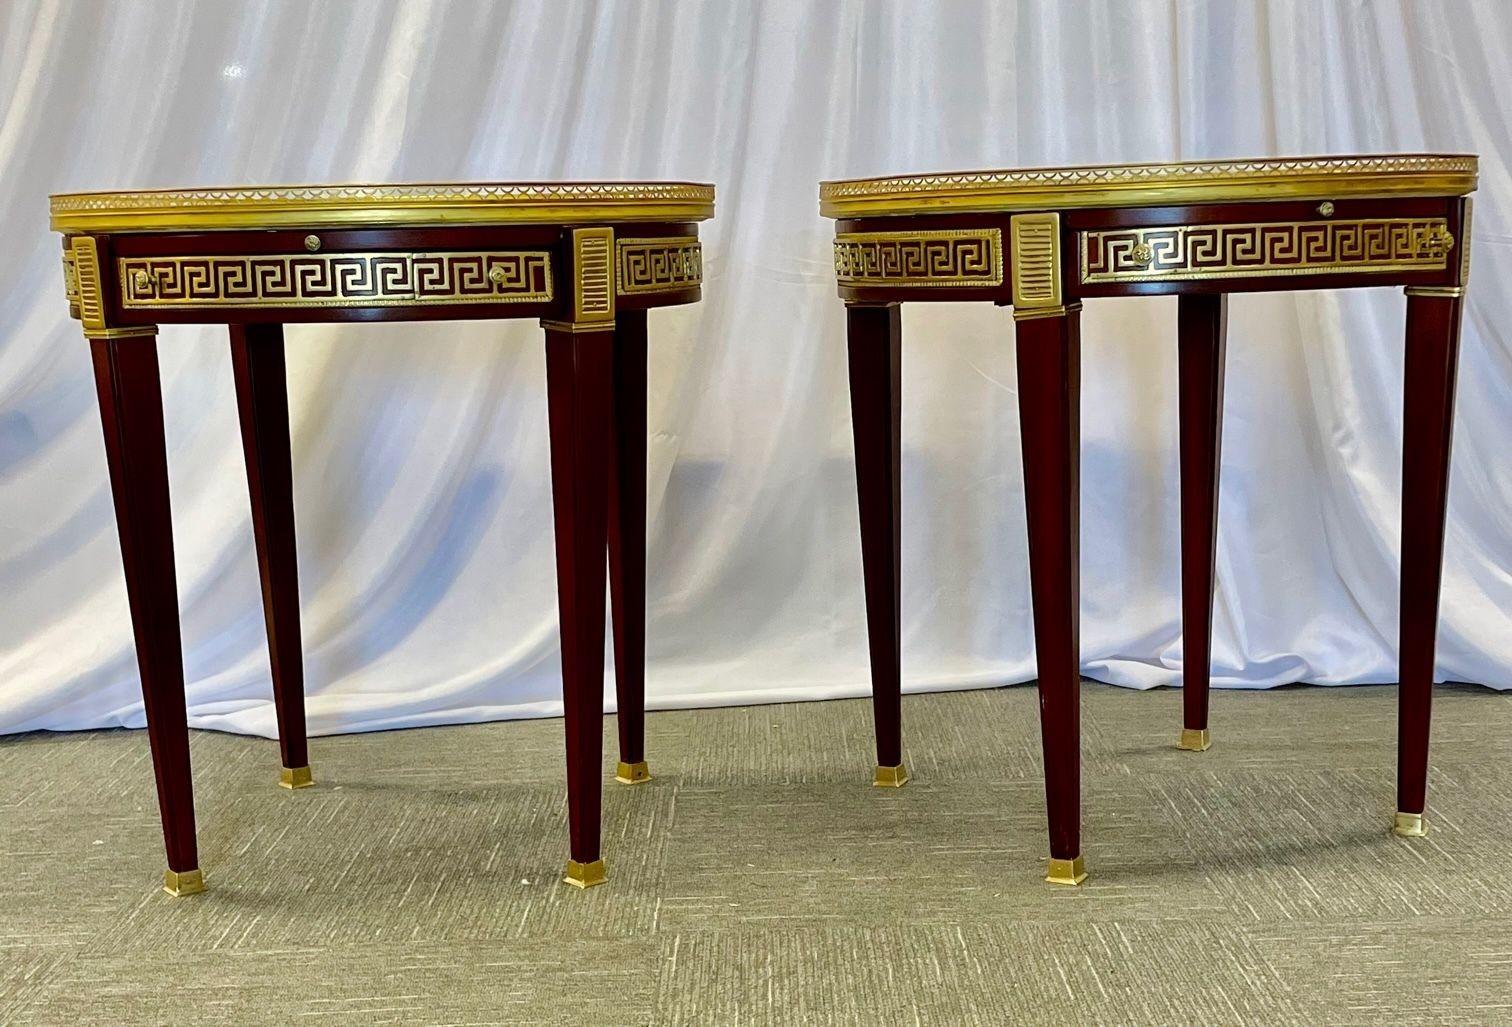 Pair of marble top greek key bouillotte or end tables, manner of Maison Jansen.
 
A pair of marble top Greek Key Bouillotte or end, side, lamp or center tables. Manner of Jansen in mahogany with double drawers and pull-out slides. Each bronze